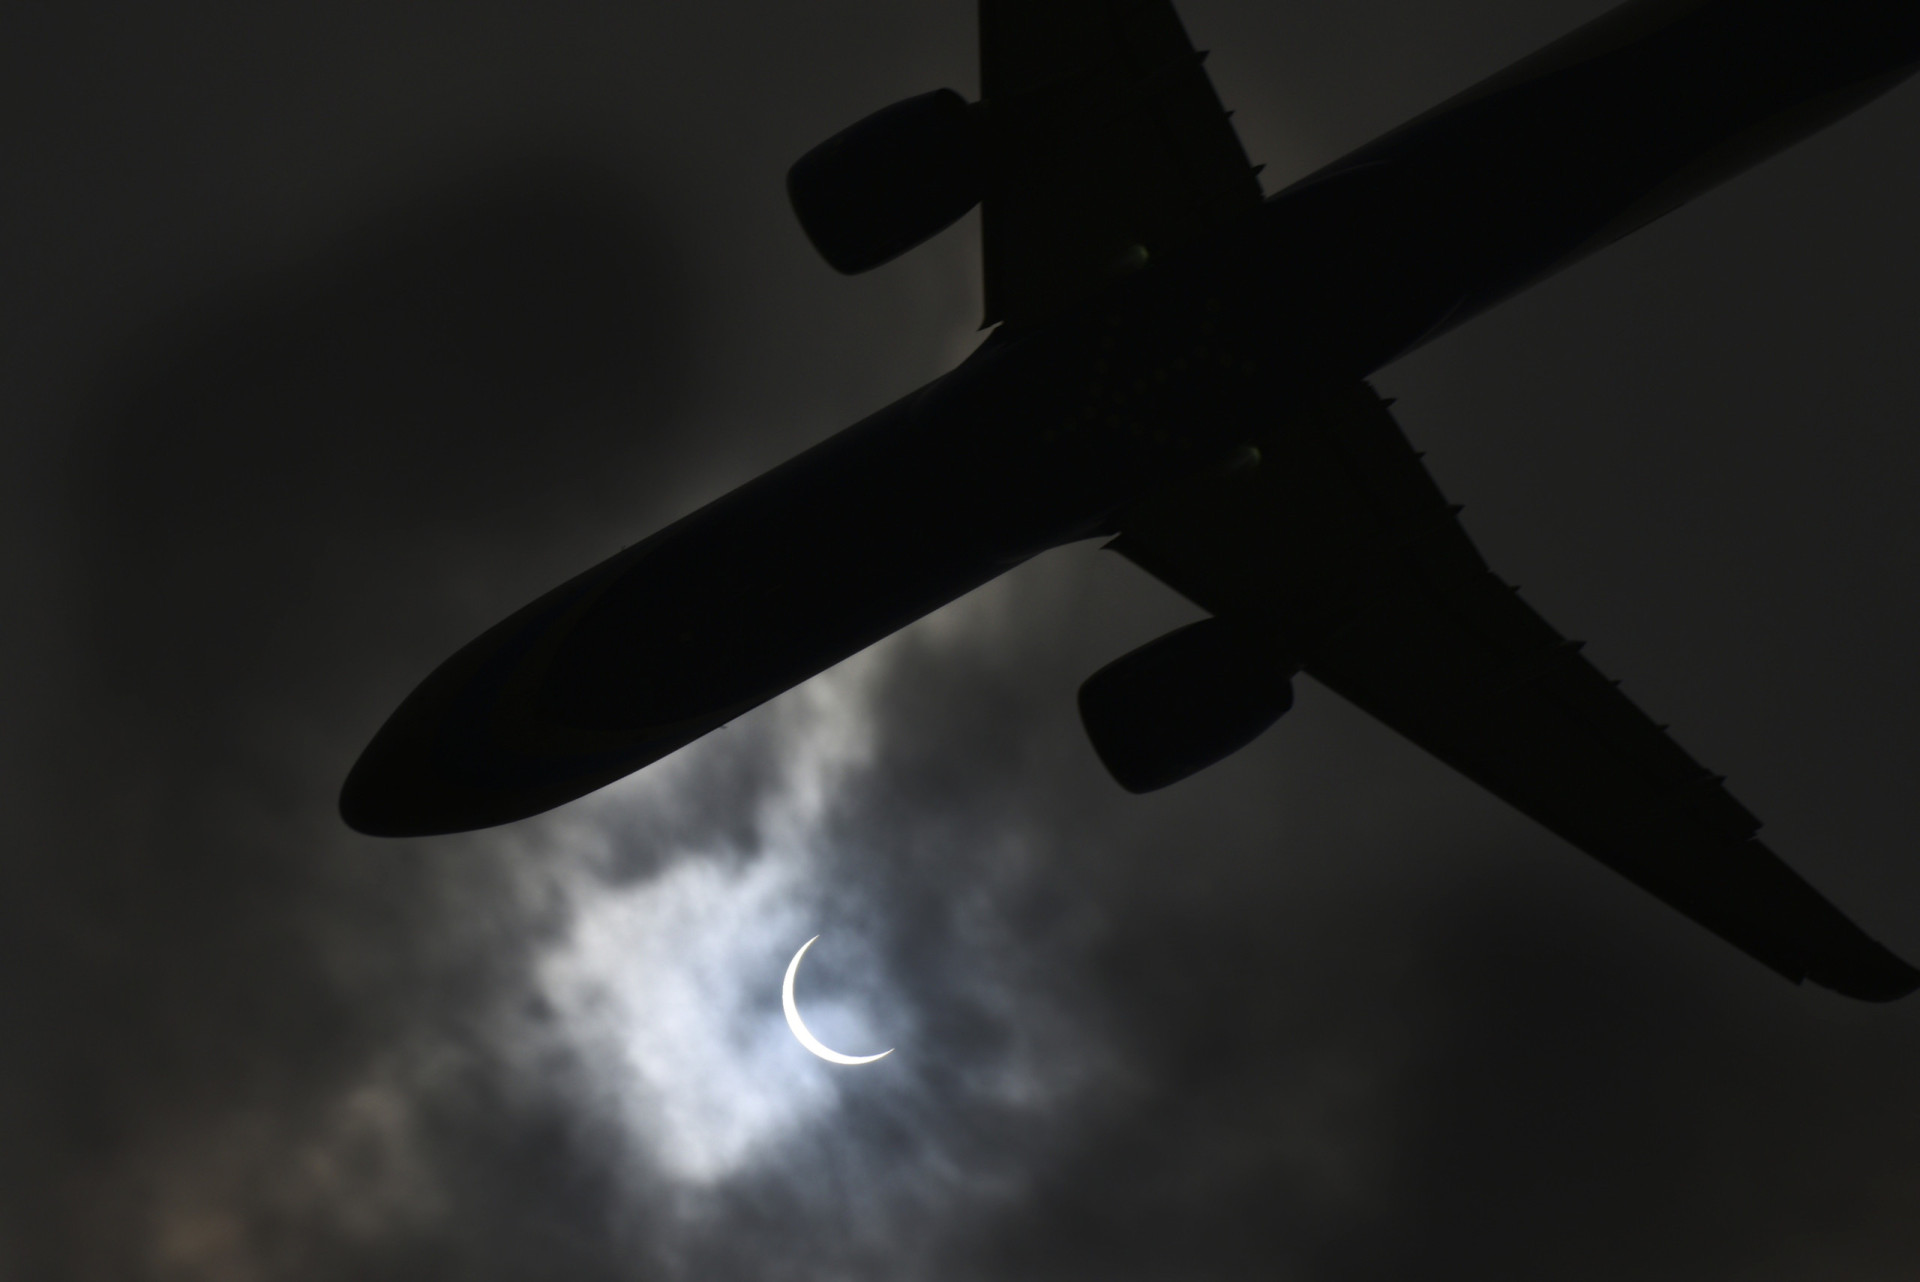 <p>CBS News notes that while most eclipse chasers will be positioning themselves in states along the path of totality, others will take to the skies, timing flights to view the eclipse while airborne.</p><p>You may also like:<a href="https://www.starsinsider.com/n/269146?utm_source=msn.com&utm_medium=display&utm_campaign=referral_description&utm_content=695978en-ca"> Take a look at some of the most isolated places in the world</a></p>